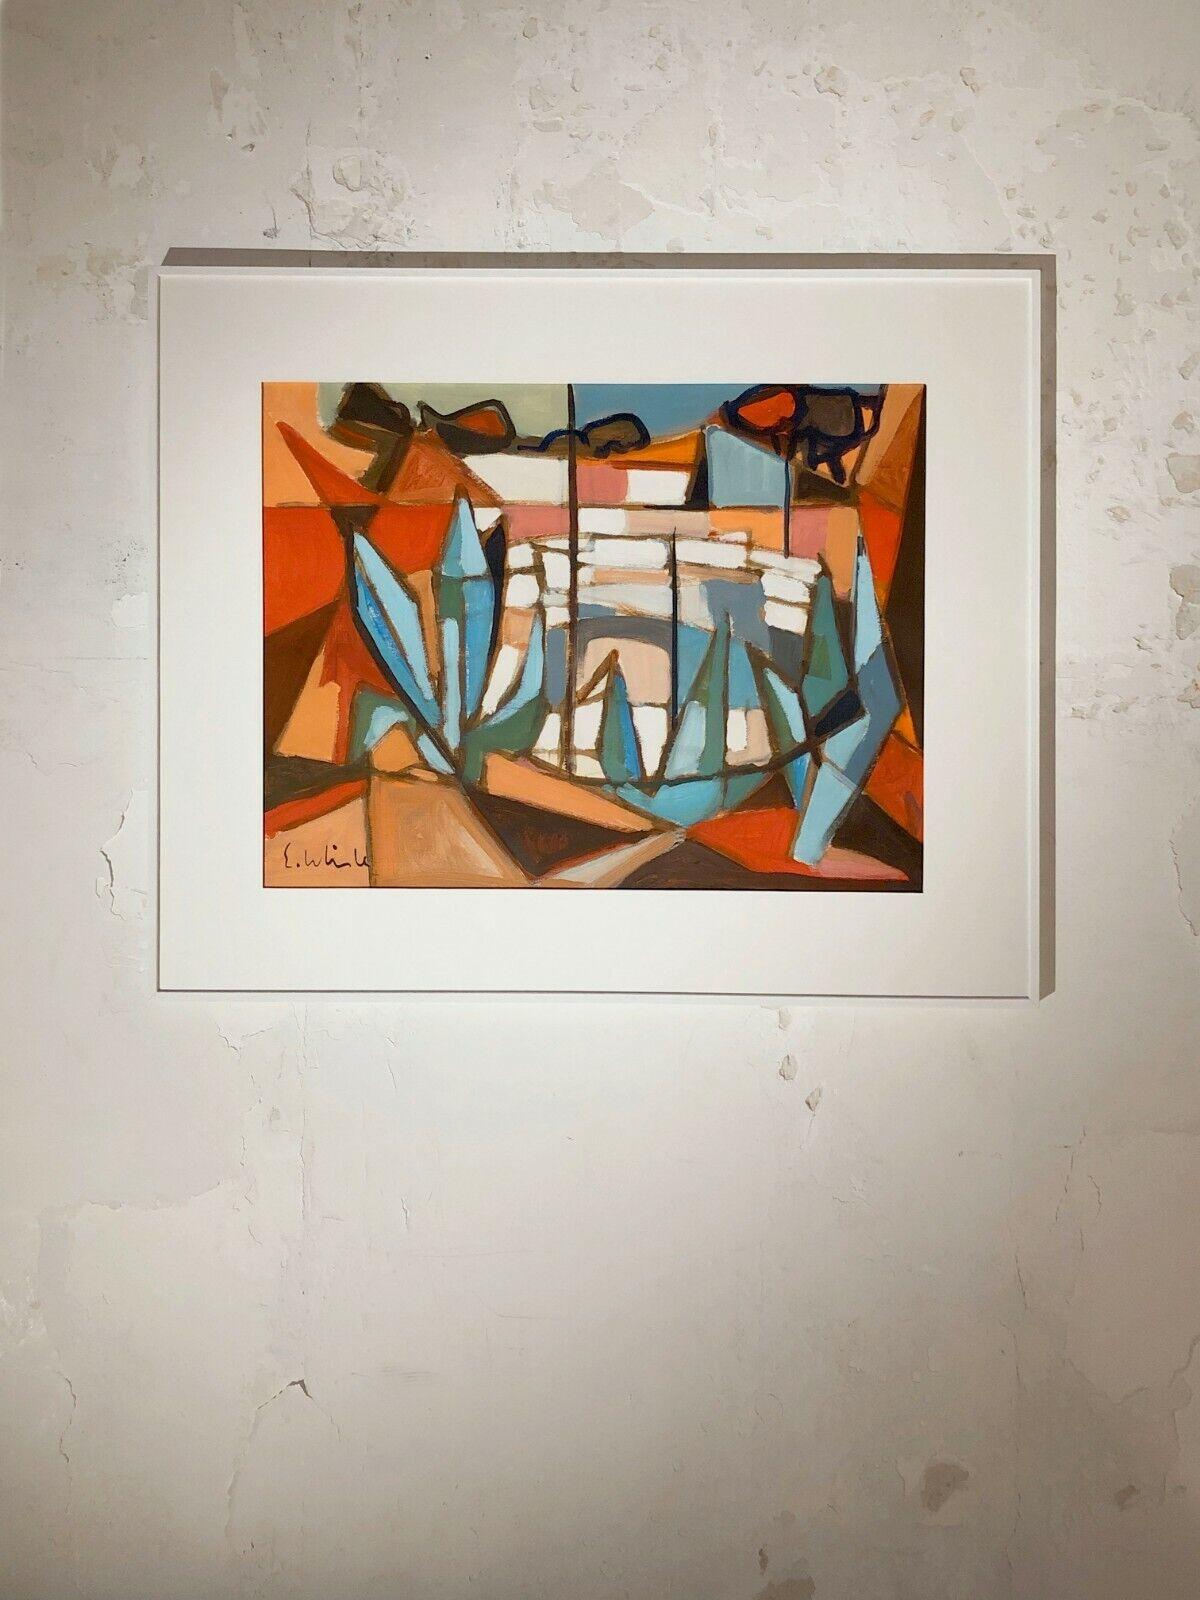 An authentic painting, both abstract and figurative work, Expressionist, Cubist, gouache on paper appearing to depict a happy stylized marine landscape, freely painted with a beautiful combination of warm joyful colors and modern expressive lines to